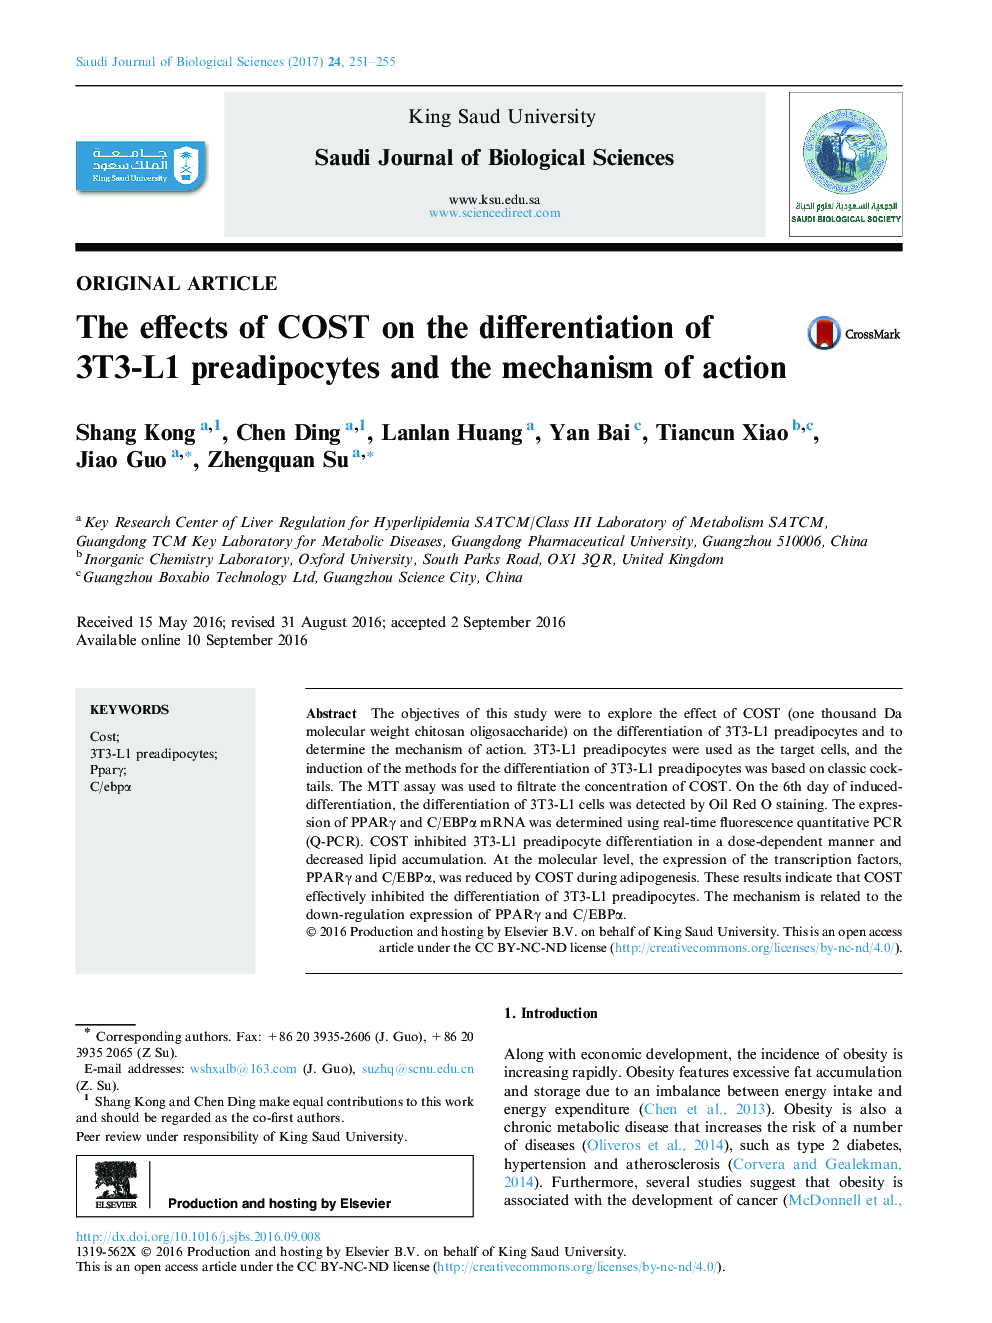 Original articleThe effects of COST on the differentiation of 3T3-L1 preadipocytes and the mechanism of action